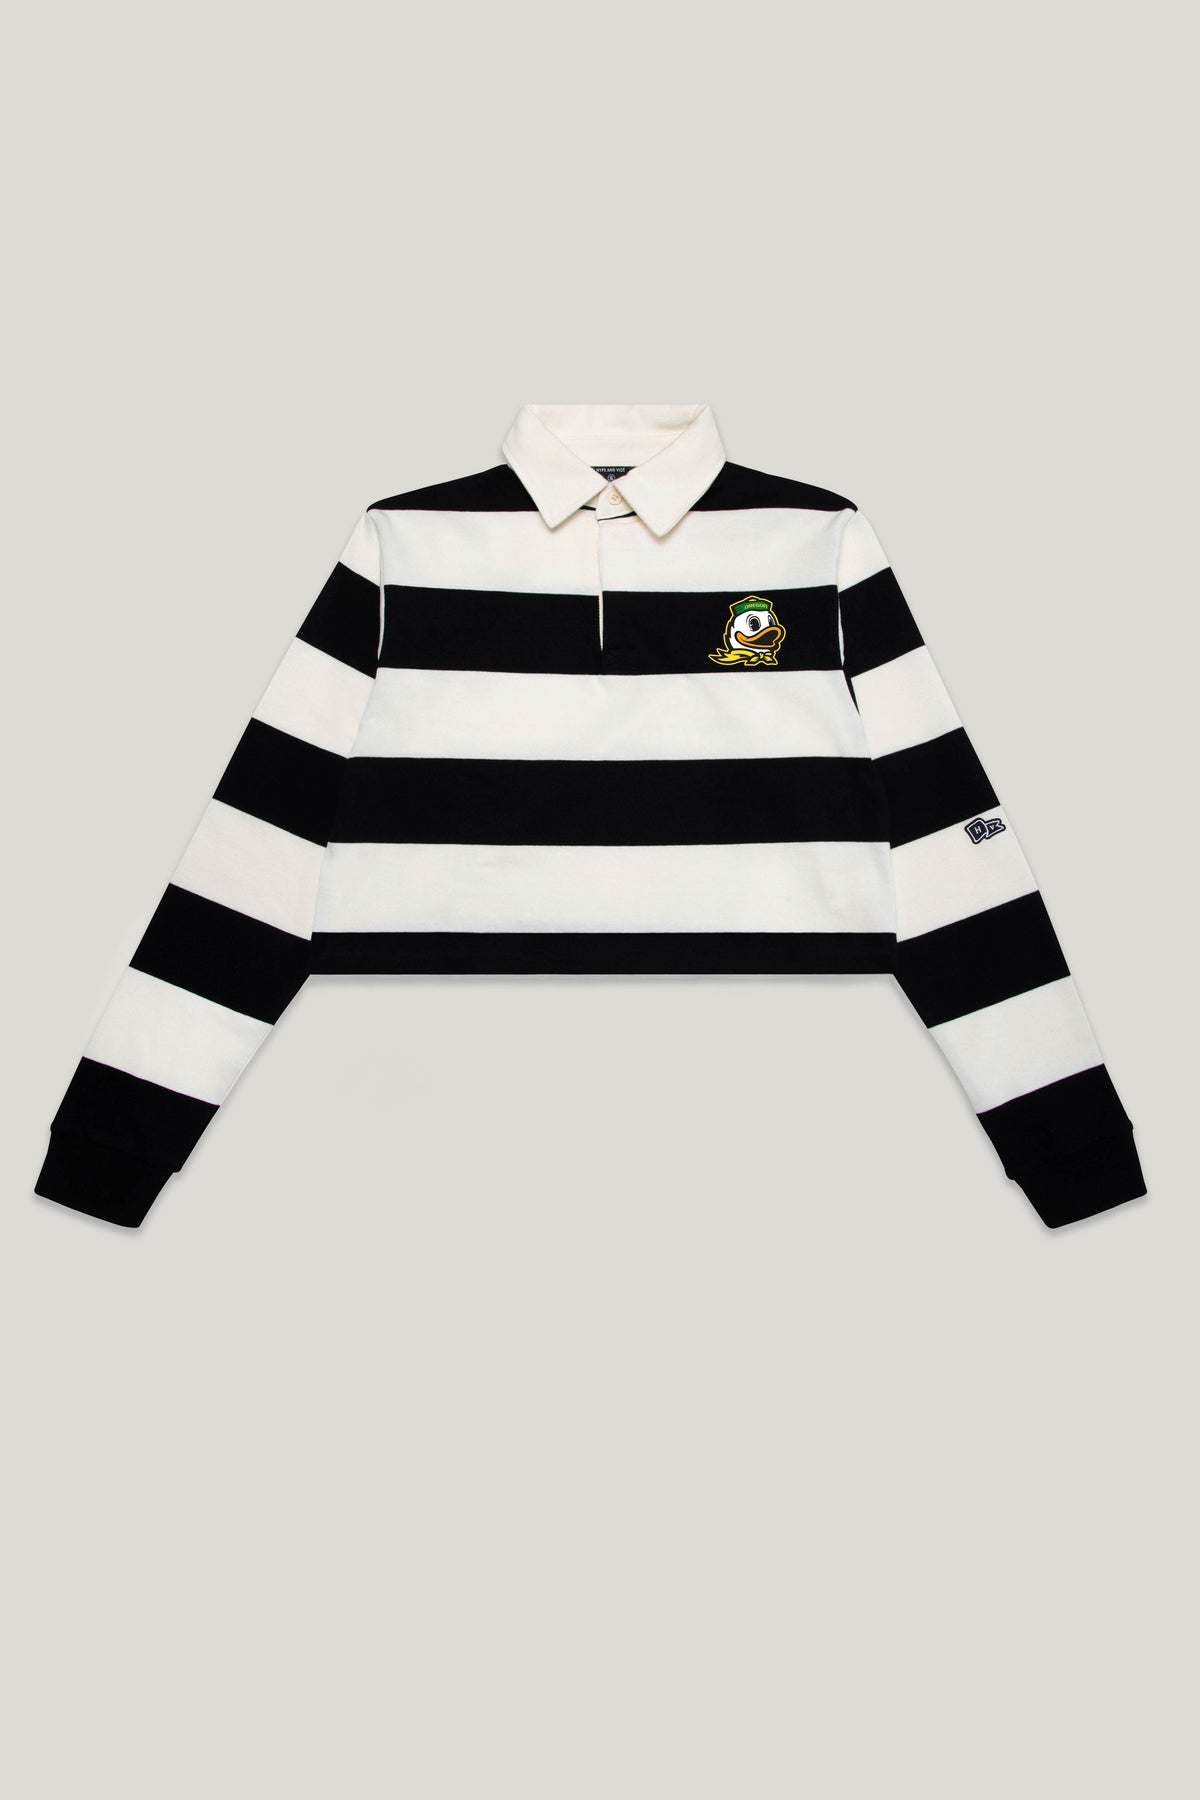 University of Oregon Rugby Top